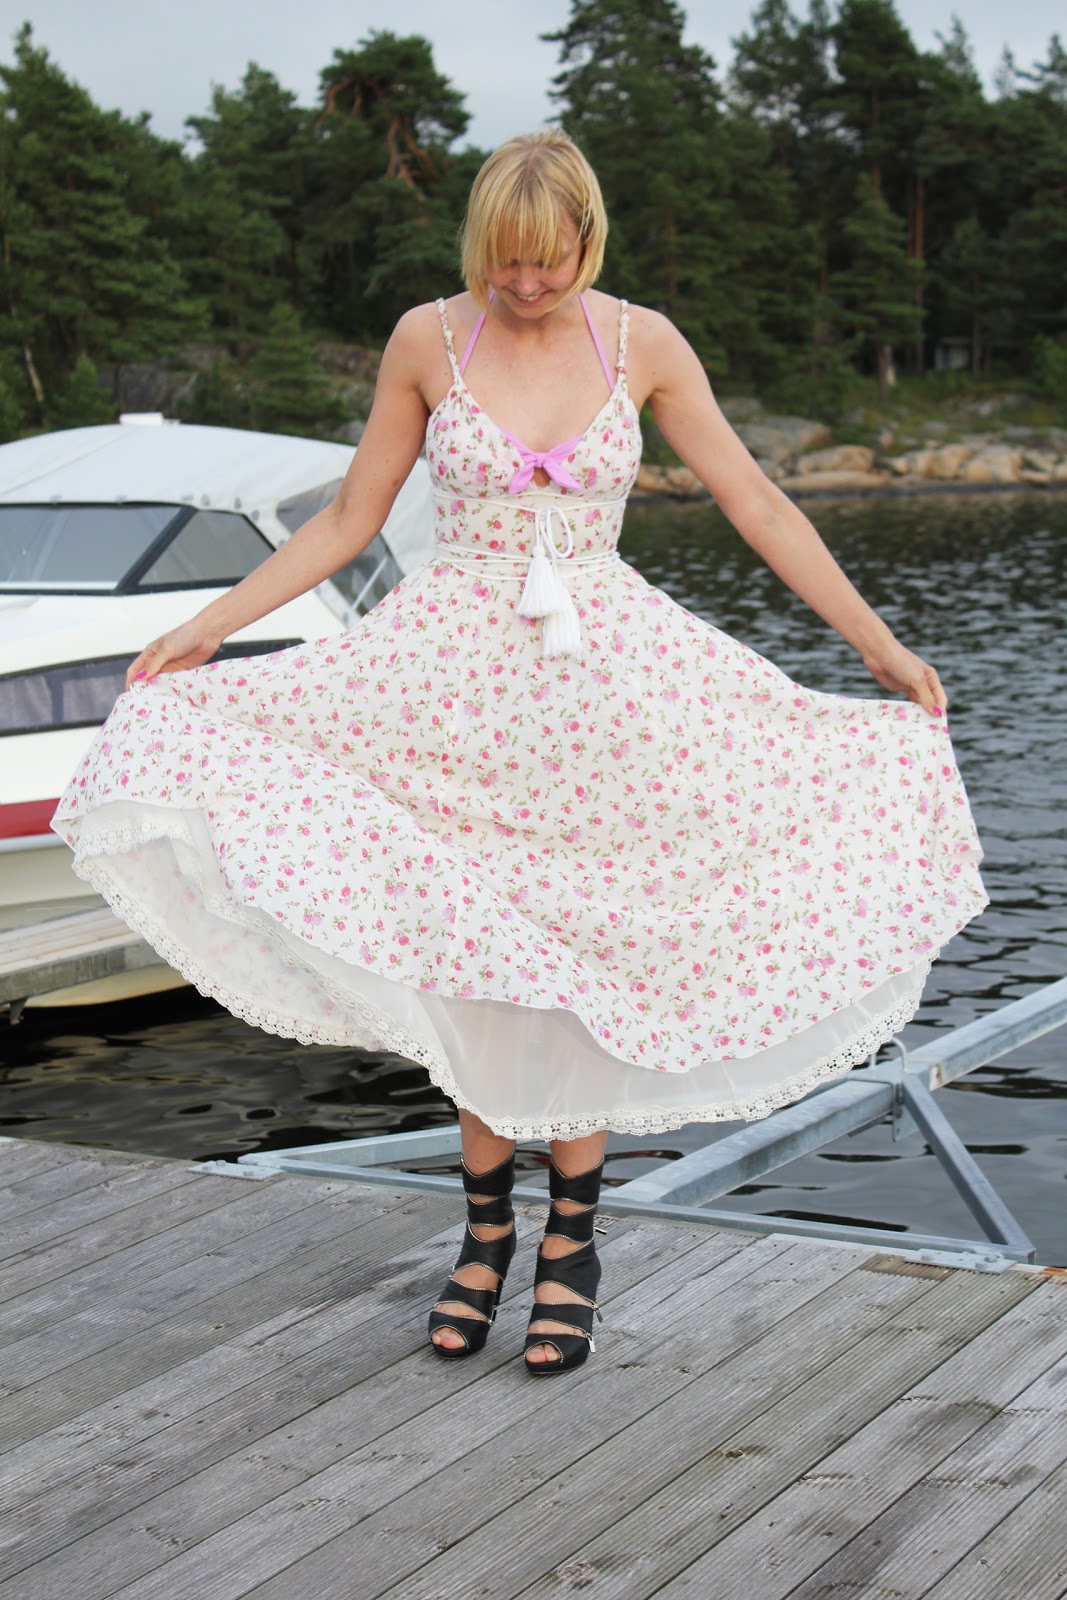 FASHION IN OSLO: Windy dresses by the sea